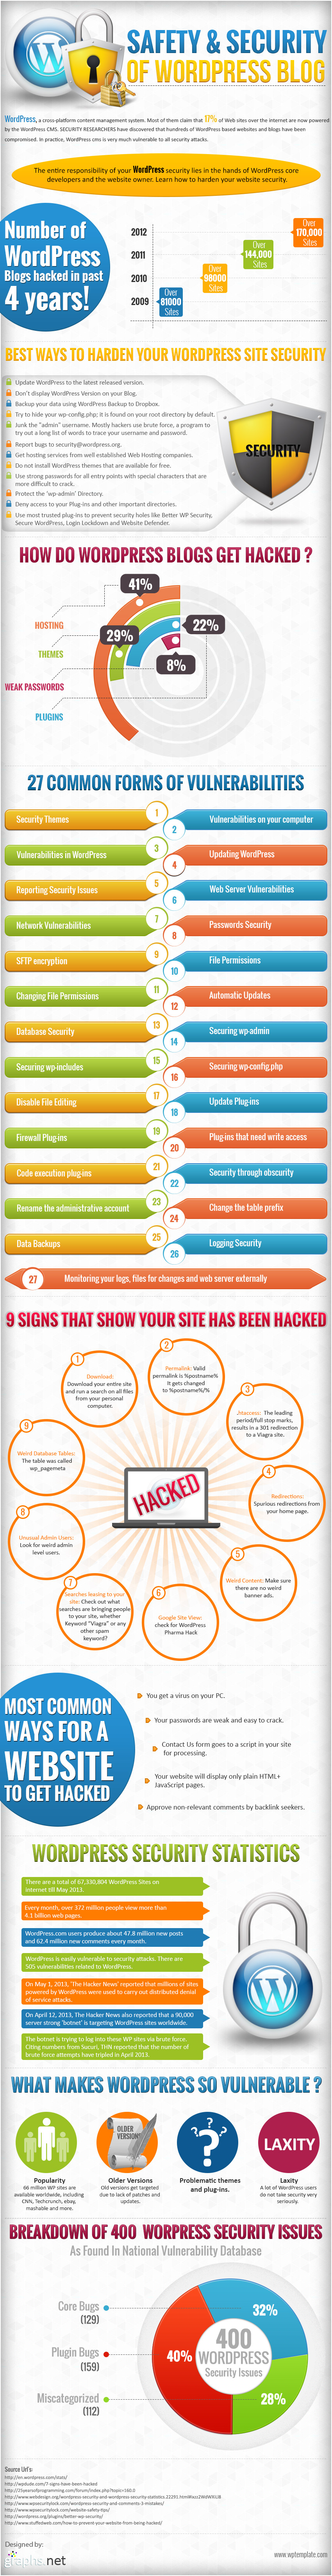 Safety and Security of WordPress Blog (Infographic)